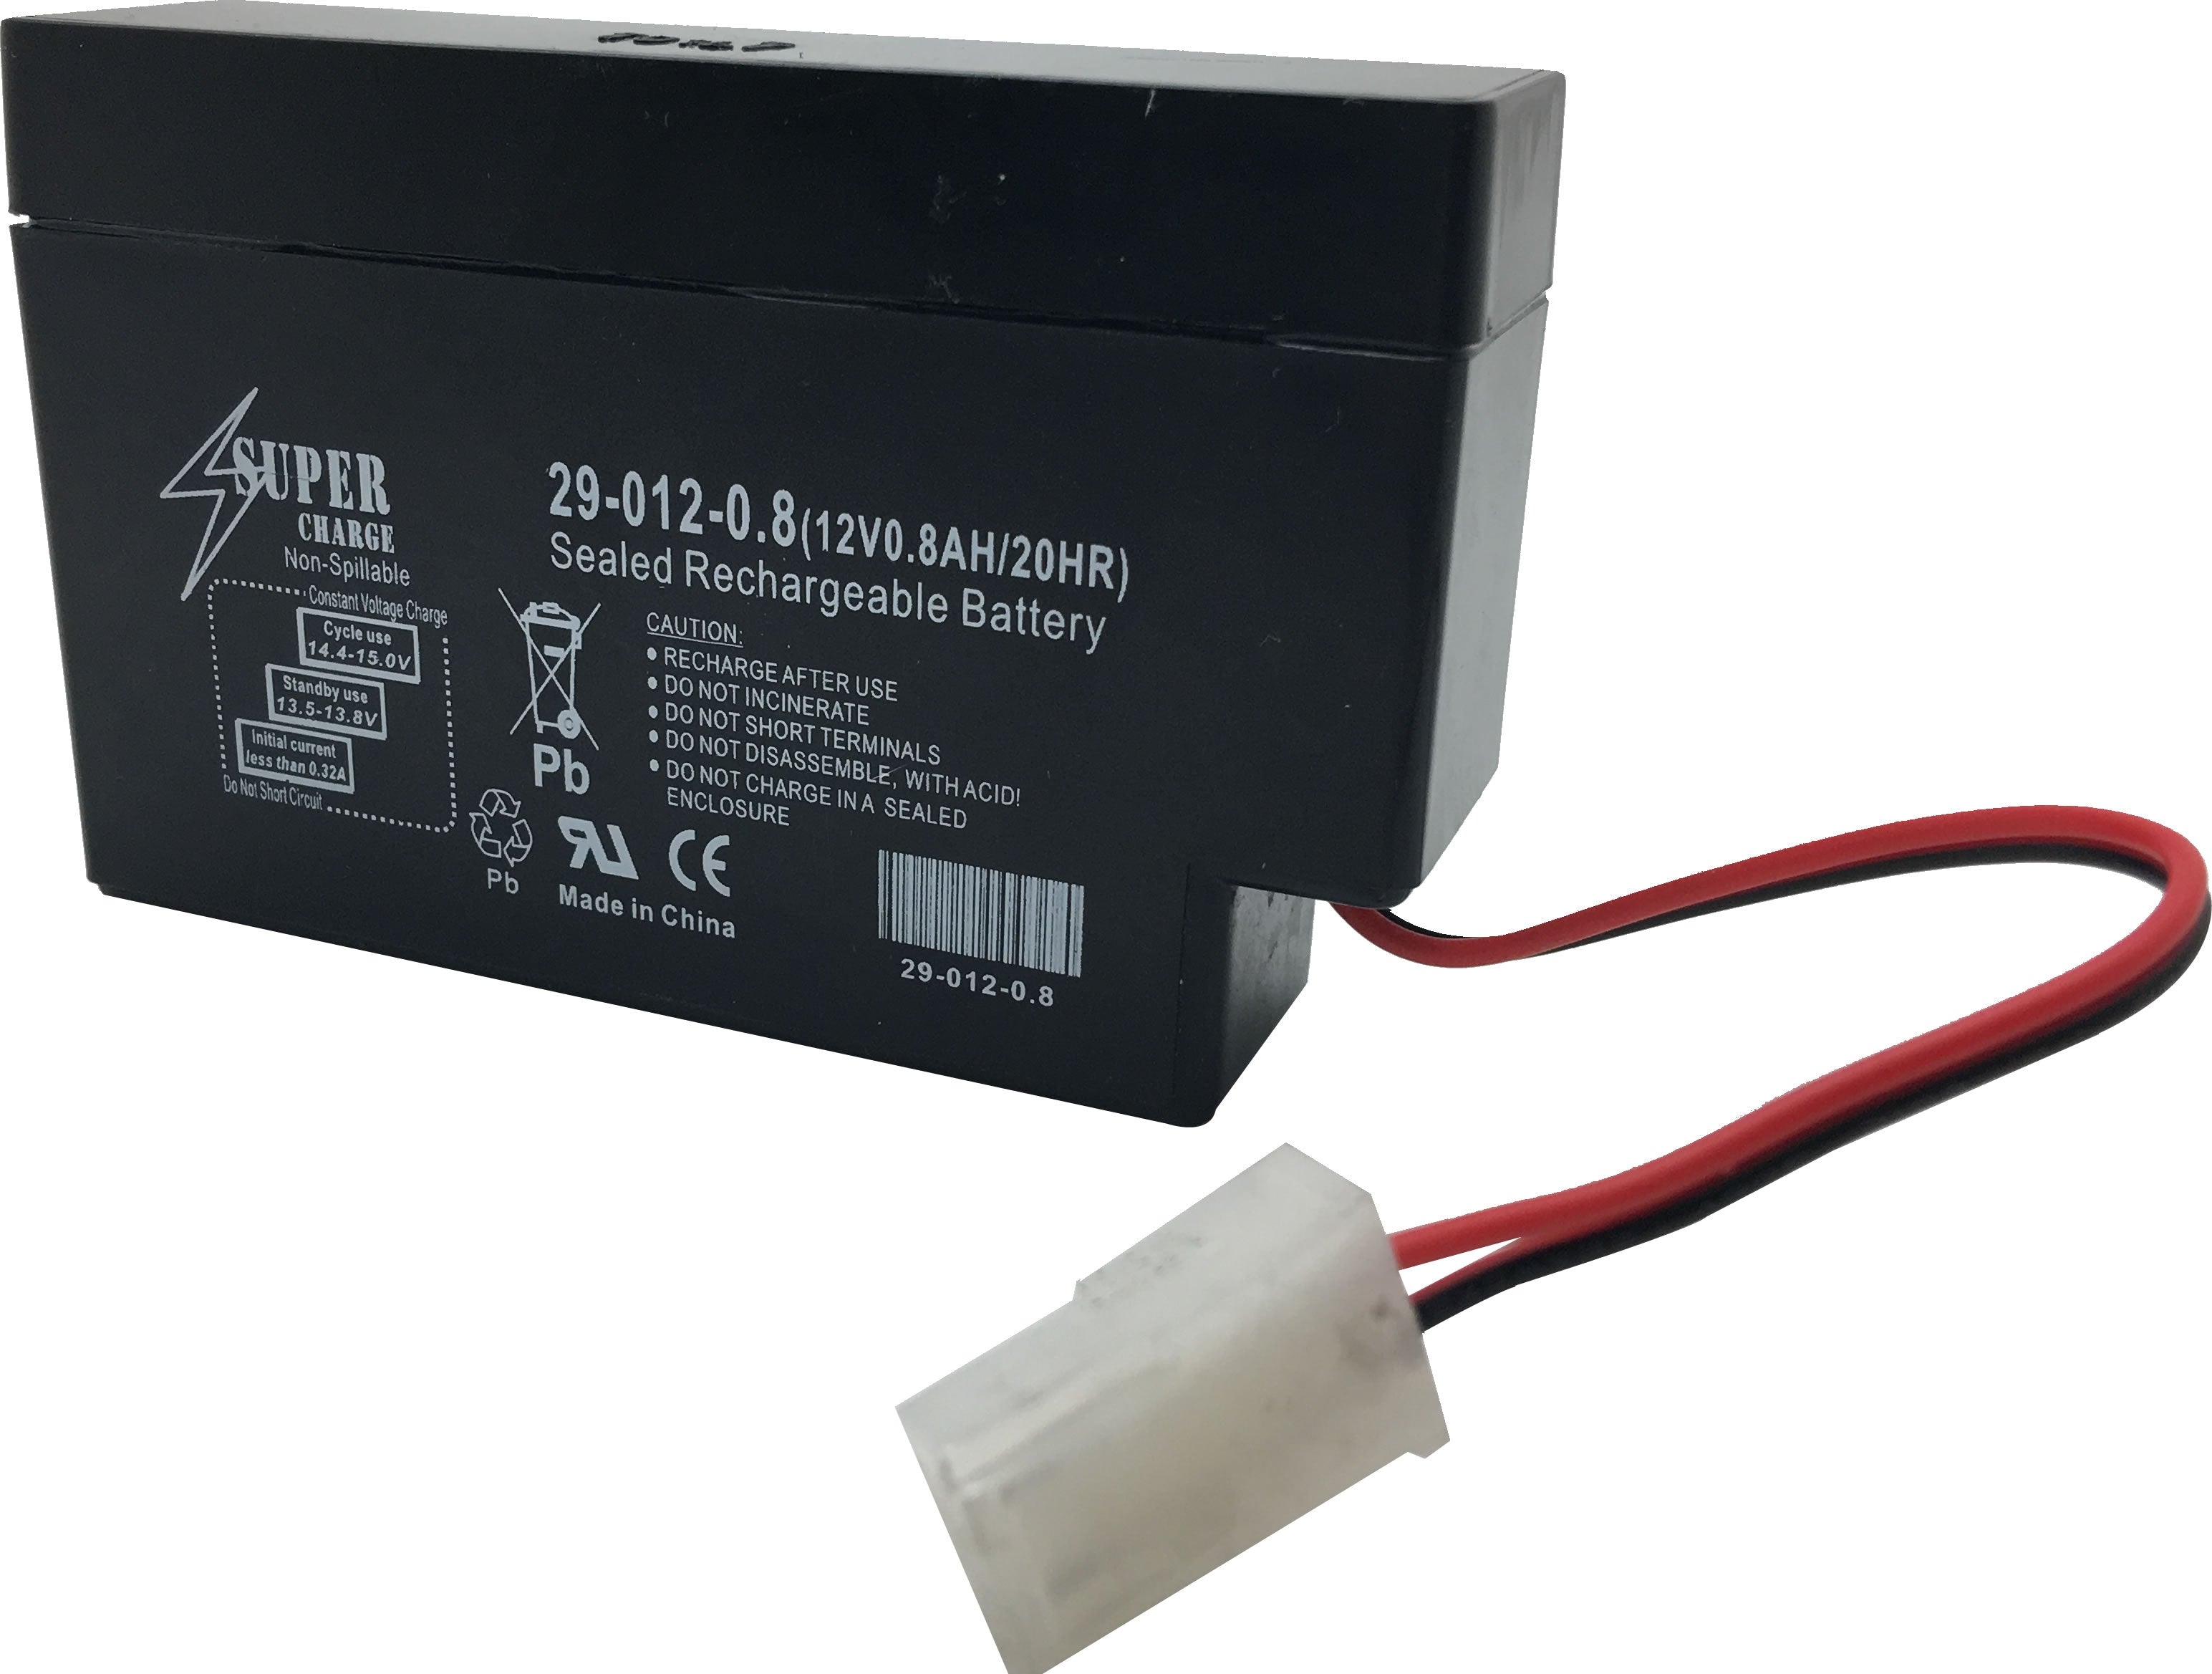 29-012-0.8 Rechargeable Battery 12V 0.8AH 20HR